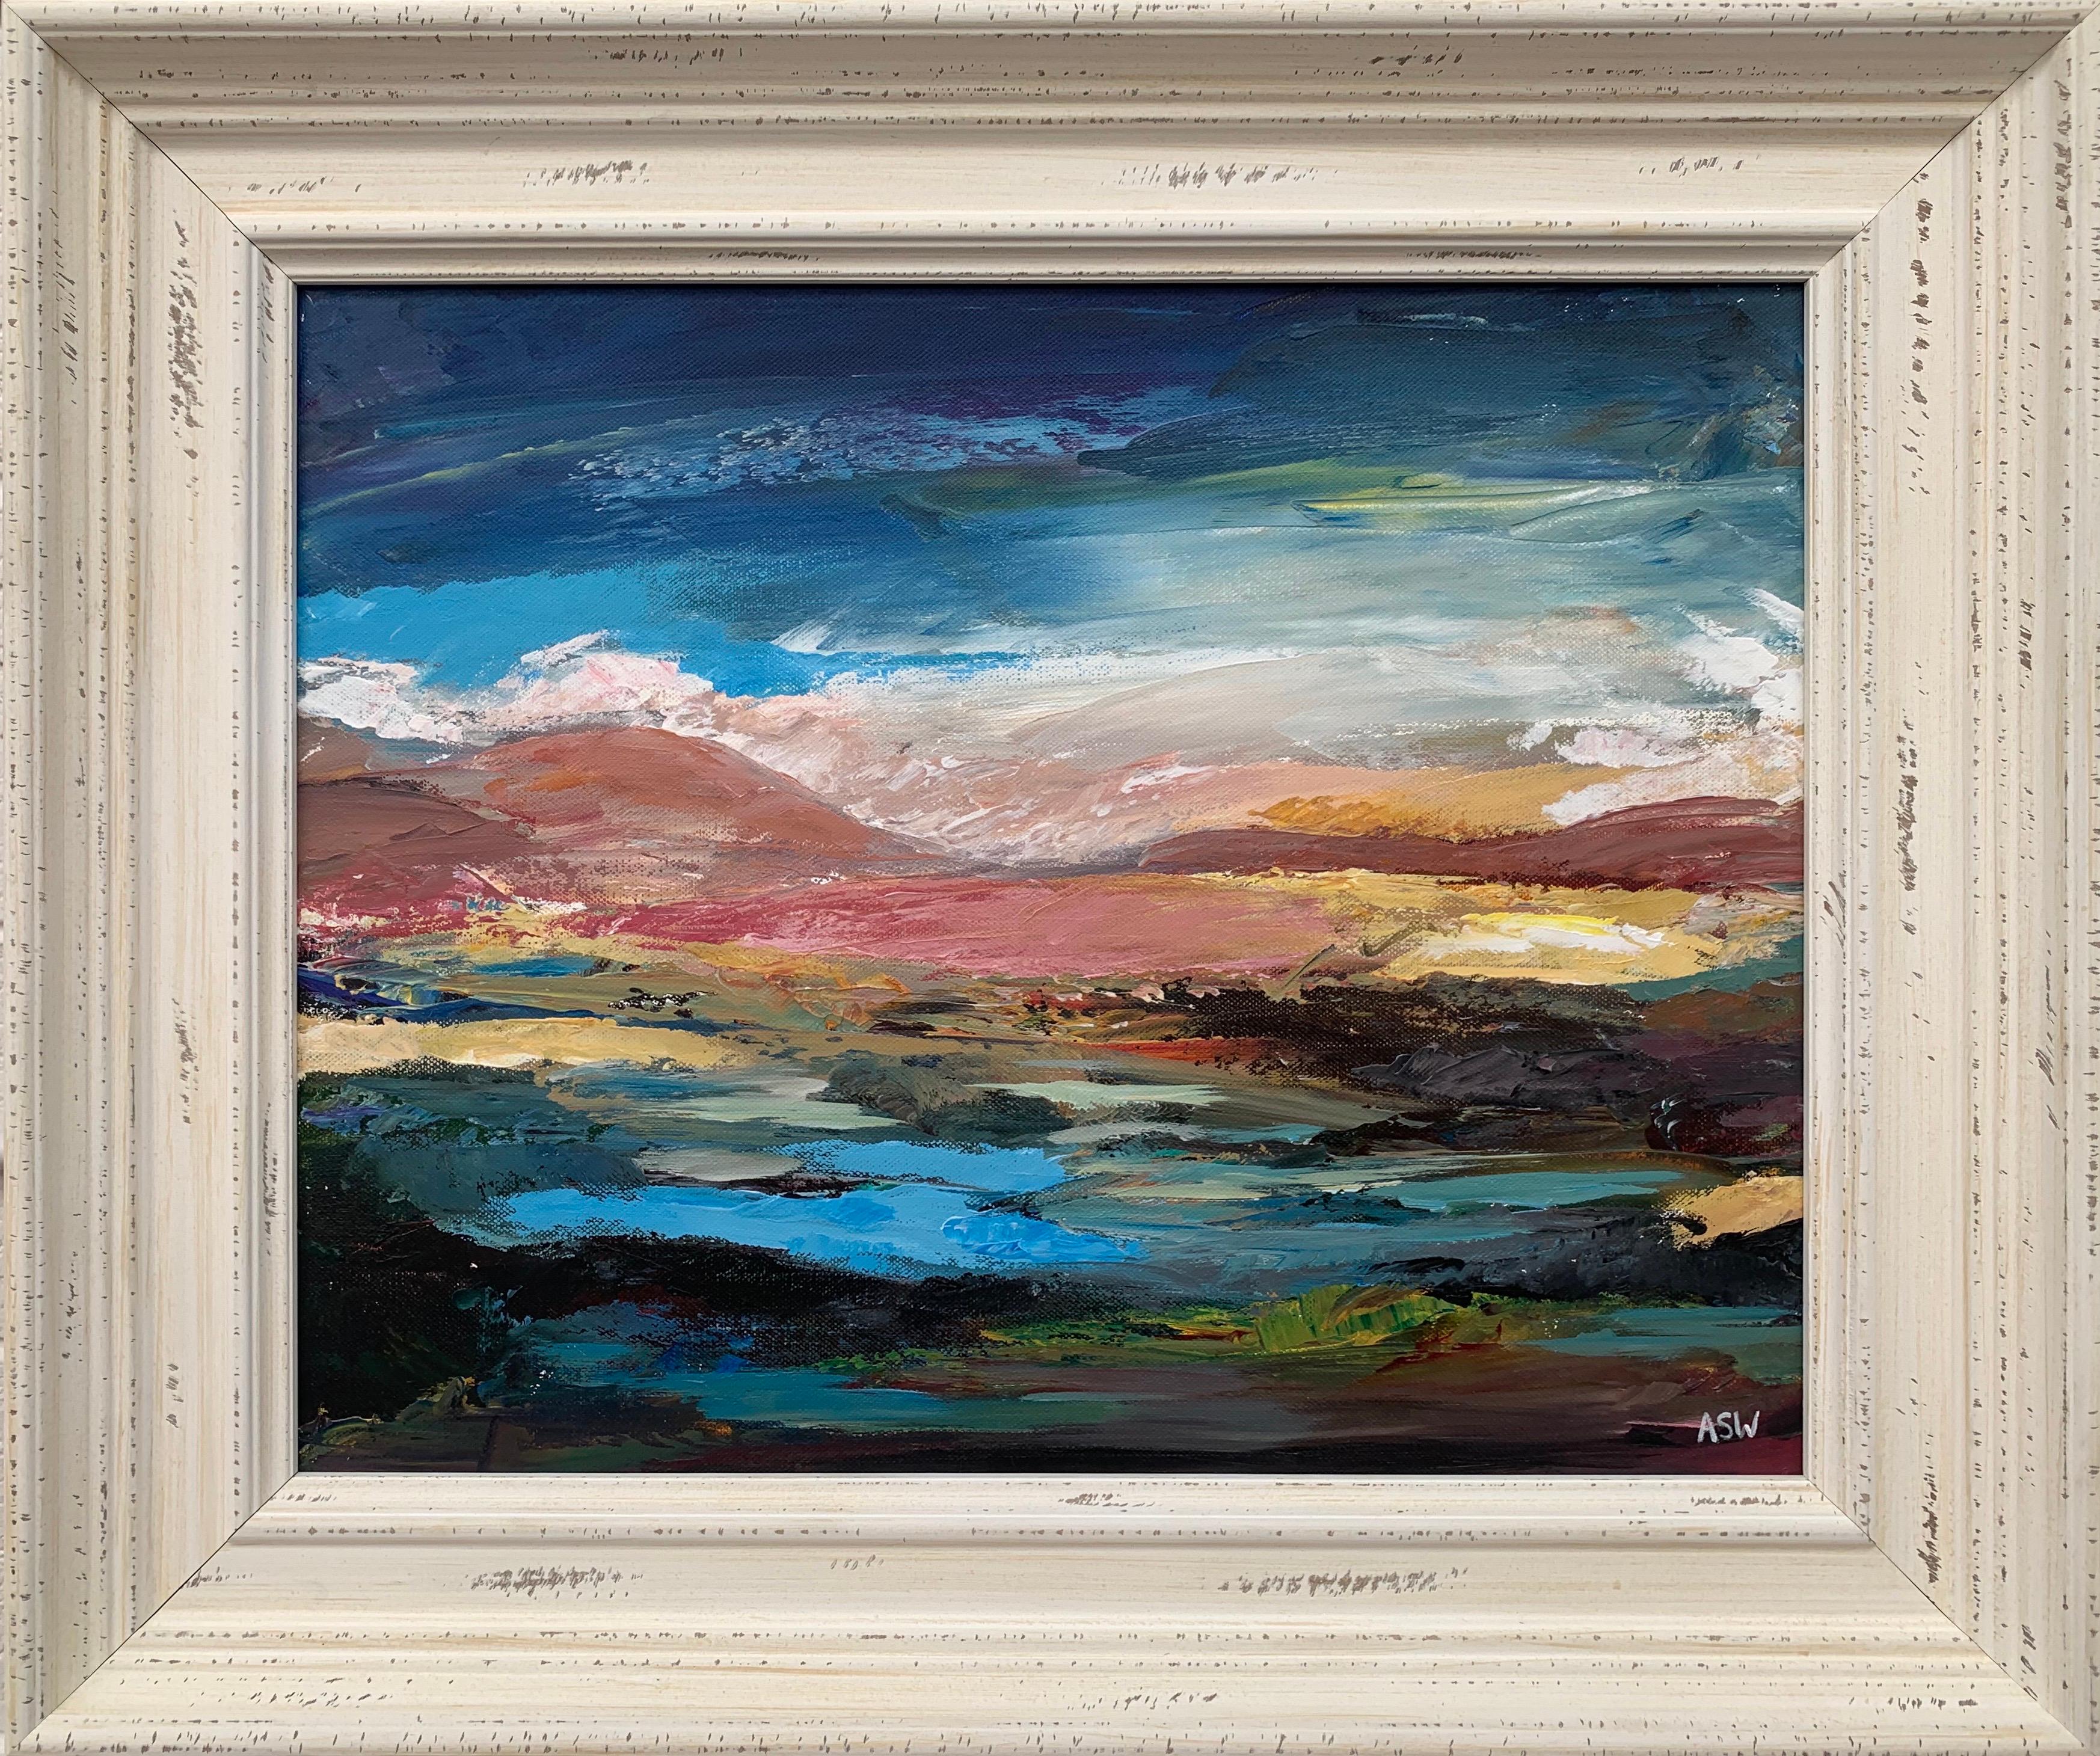 Colourful Expressive Abstract Mountain Landscape by Contemporary British Artist 